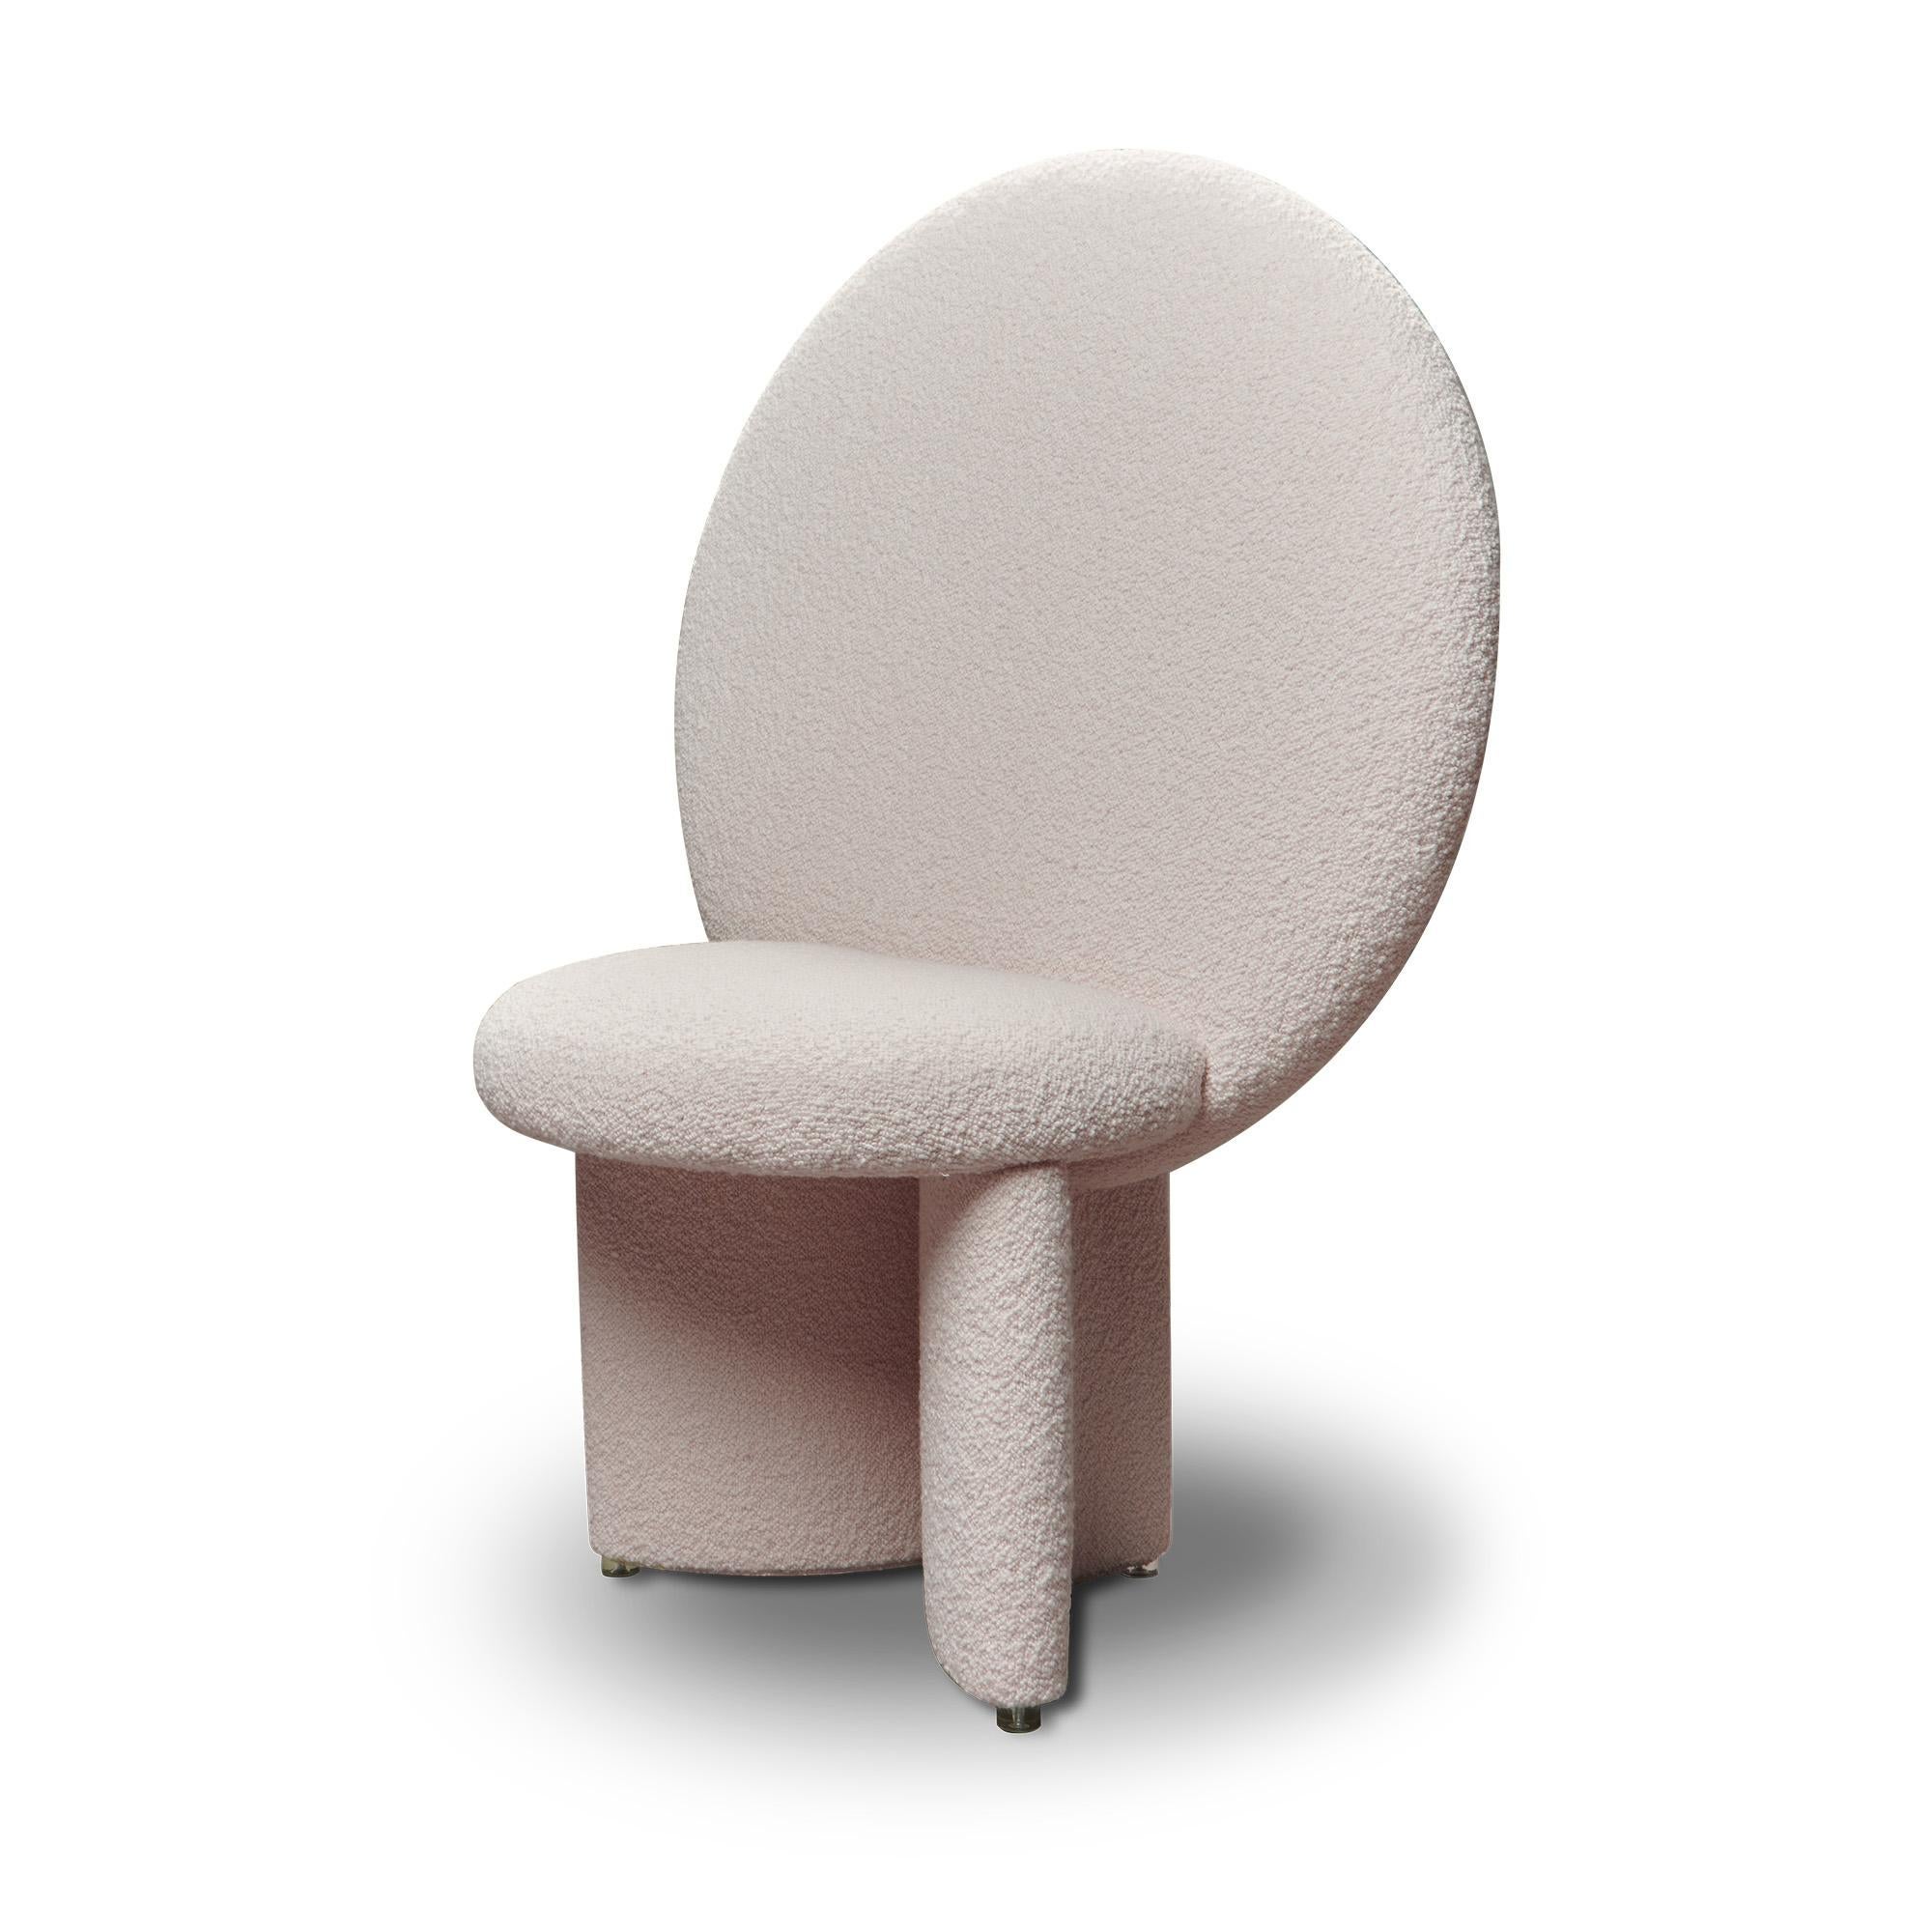 Afternoon chair has the majesty of a throne, with the huge circular backrest that reaches out and upwards, its legs curve to join the seat at angles. The chair is completely upholstered with soft, textural bouclé fabric.